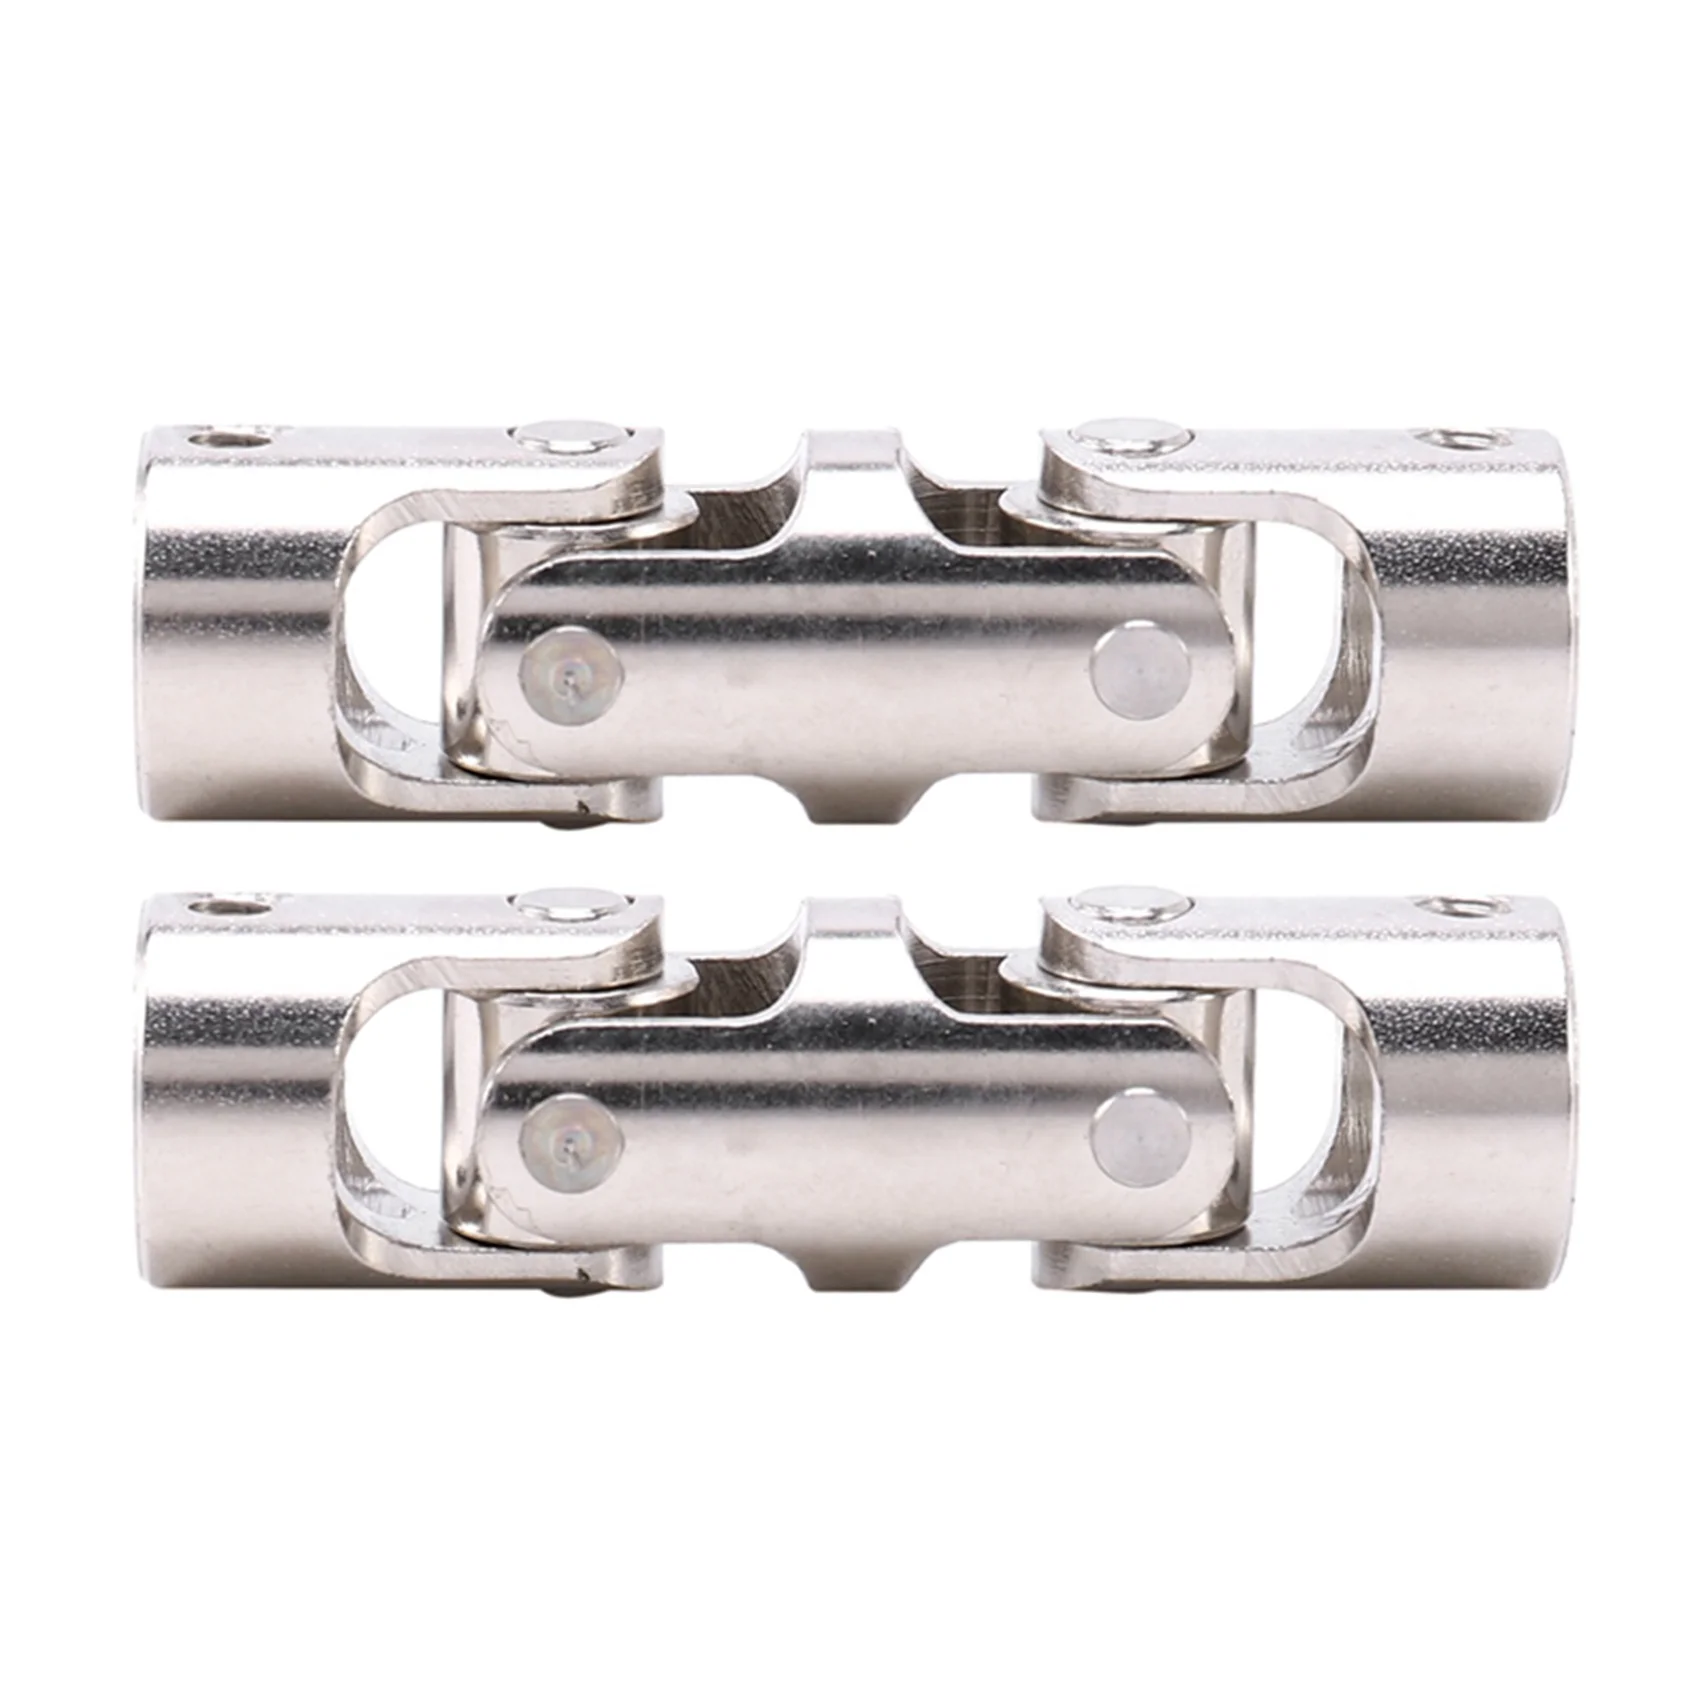 

2X Rc Double Universal Joint Cardan Joint Gimbal Couplings with Screw,8X8mm